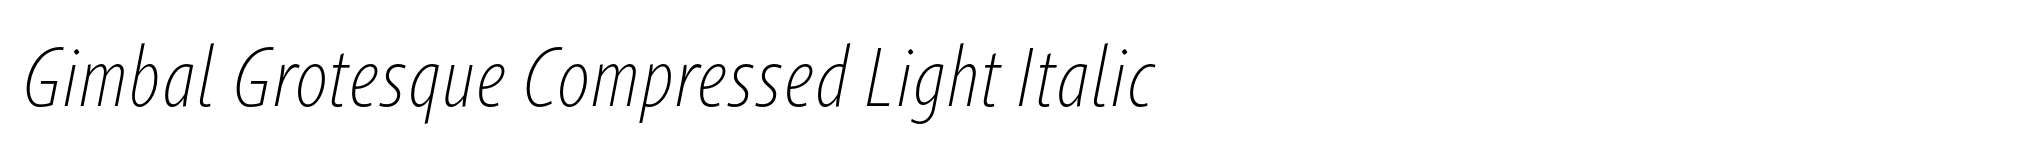 Gimbal Grotesque Compressed Light Italic image